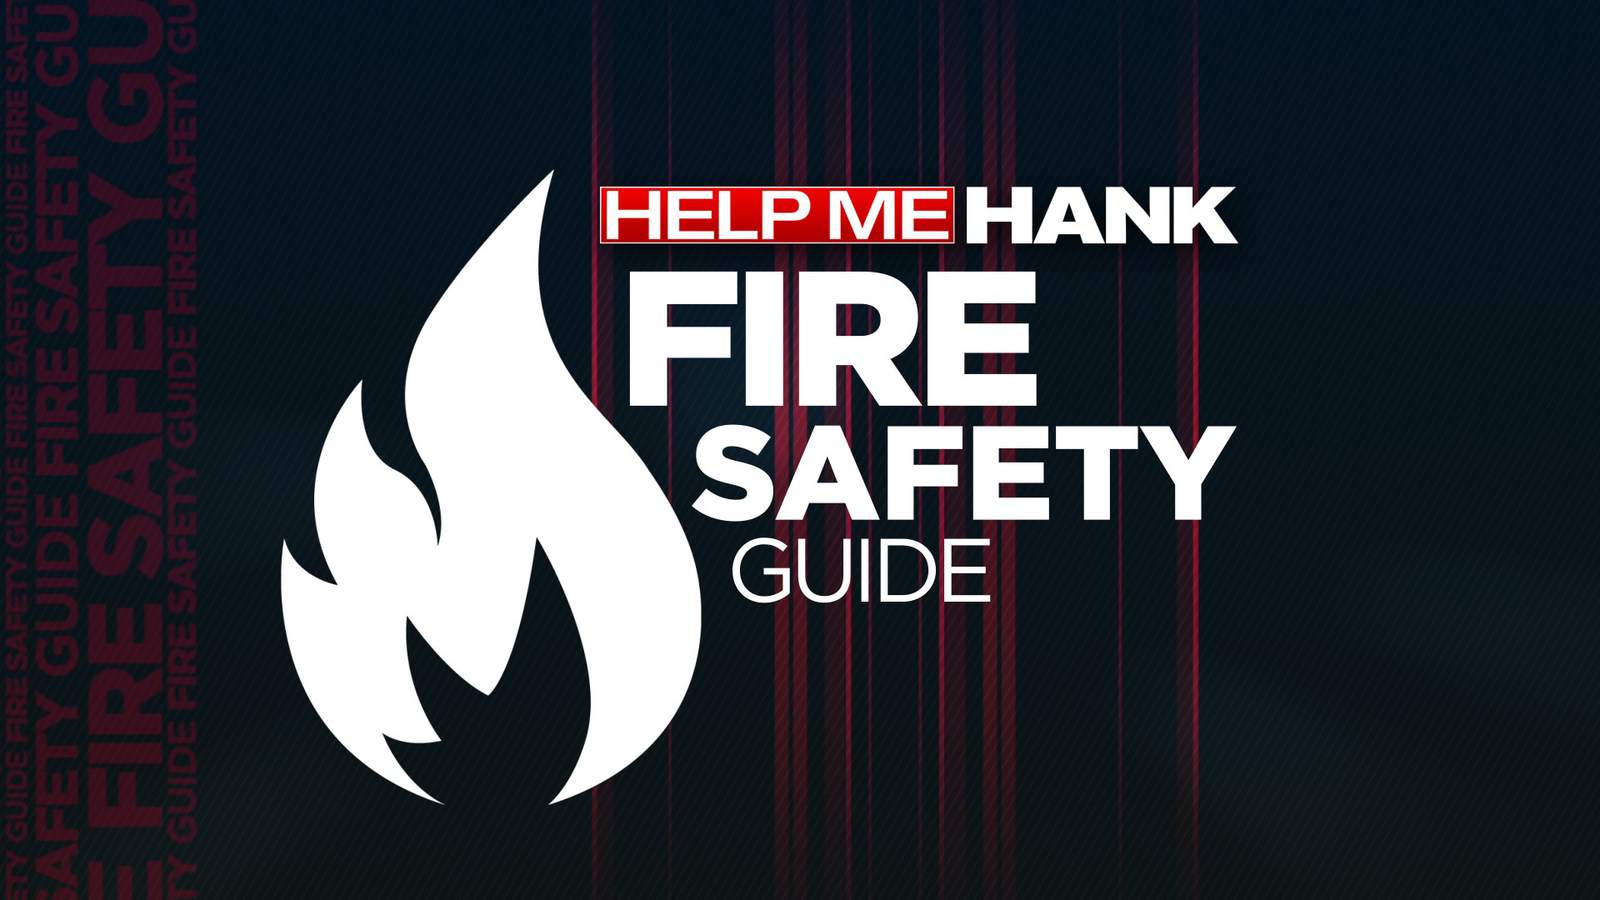 Michigan fire safety: How to protect your family from house fires